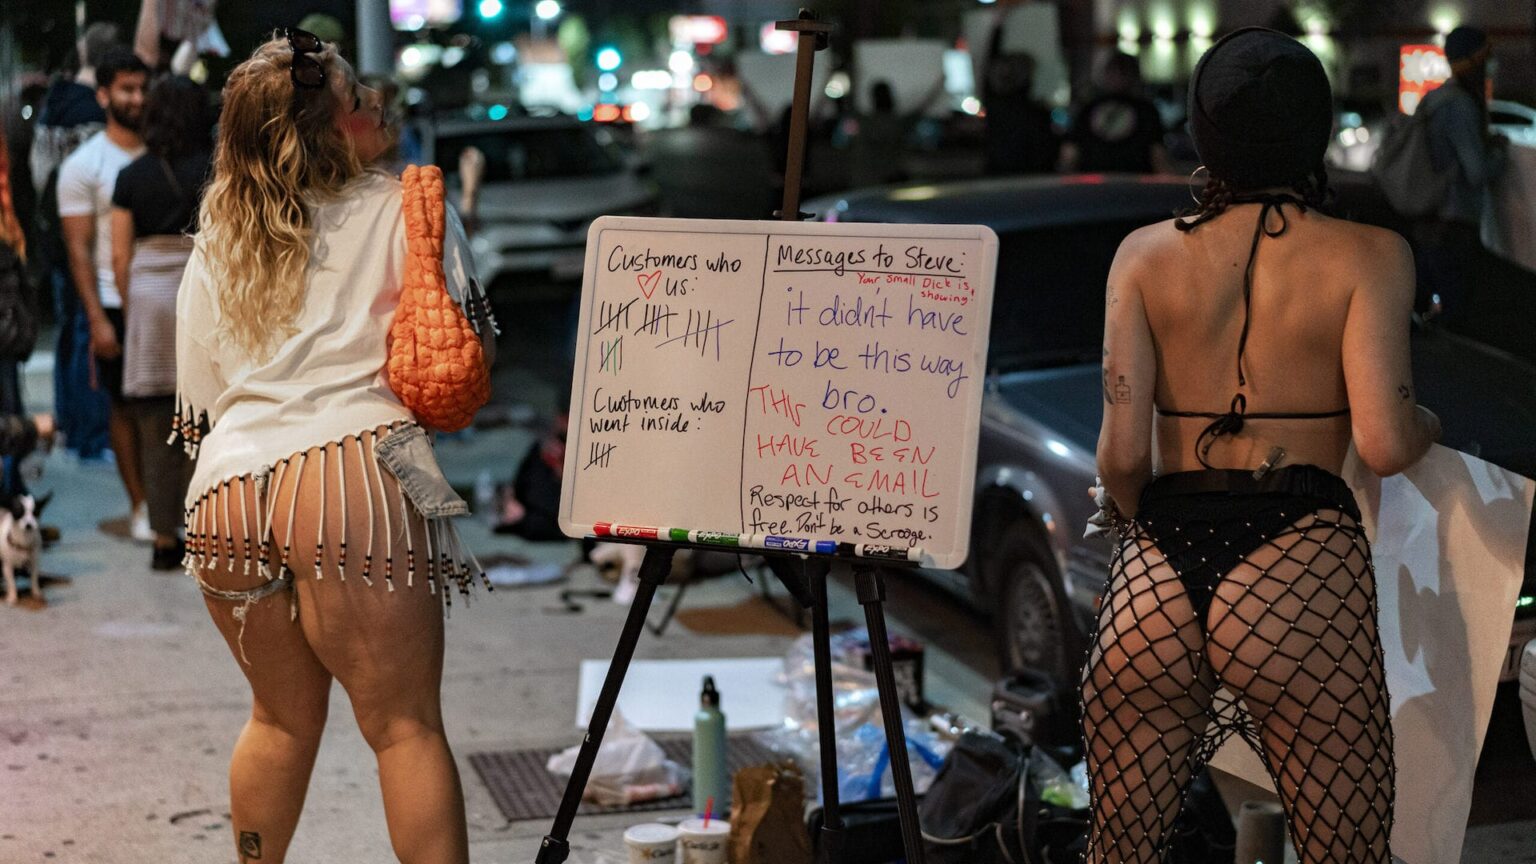 Discover the potential unionization of strippers near me. Hear from LA dancers advocating for change in this insightful article.